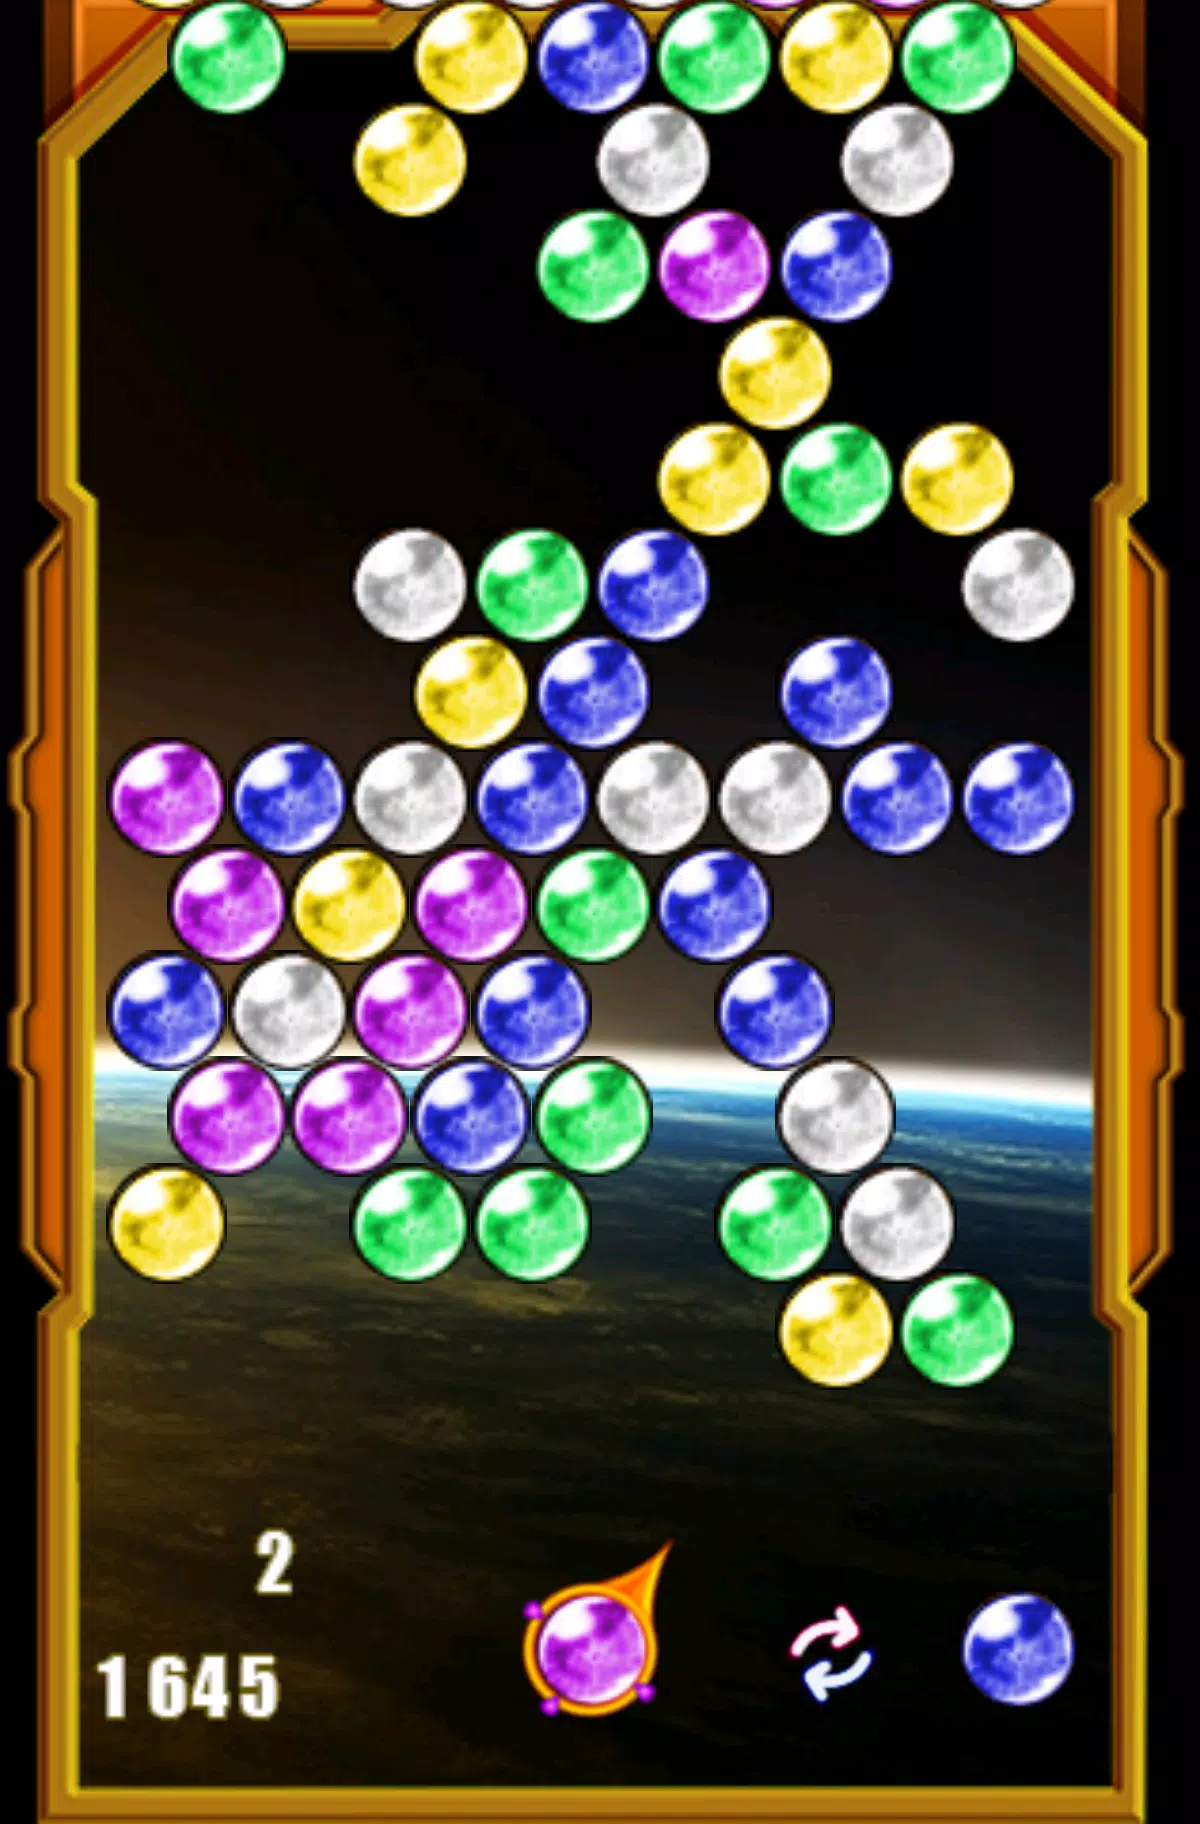 Free Bubble Deluxe Shoot 15 APK Download For Android